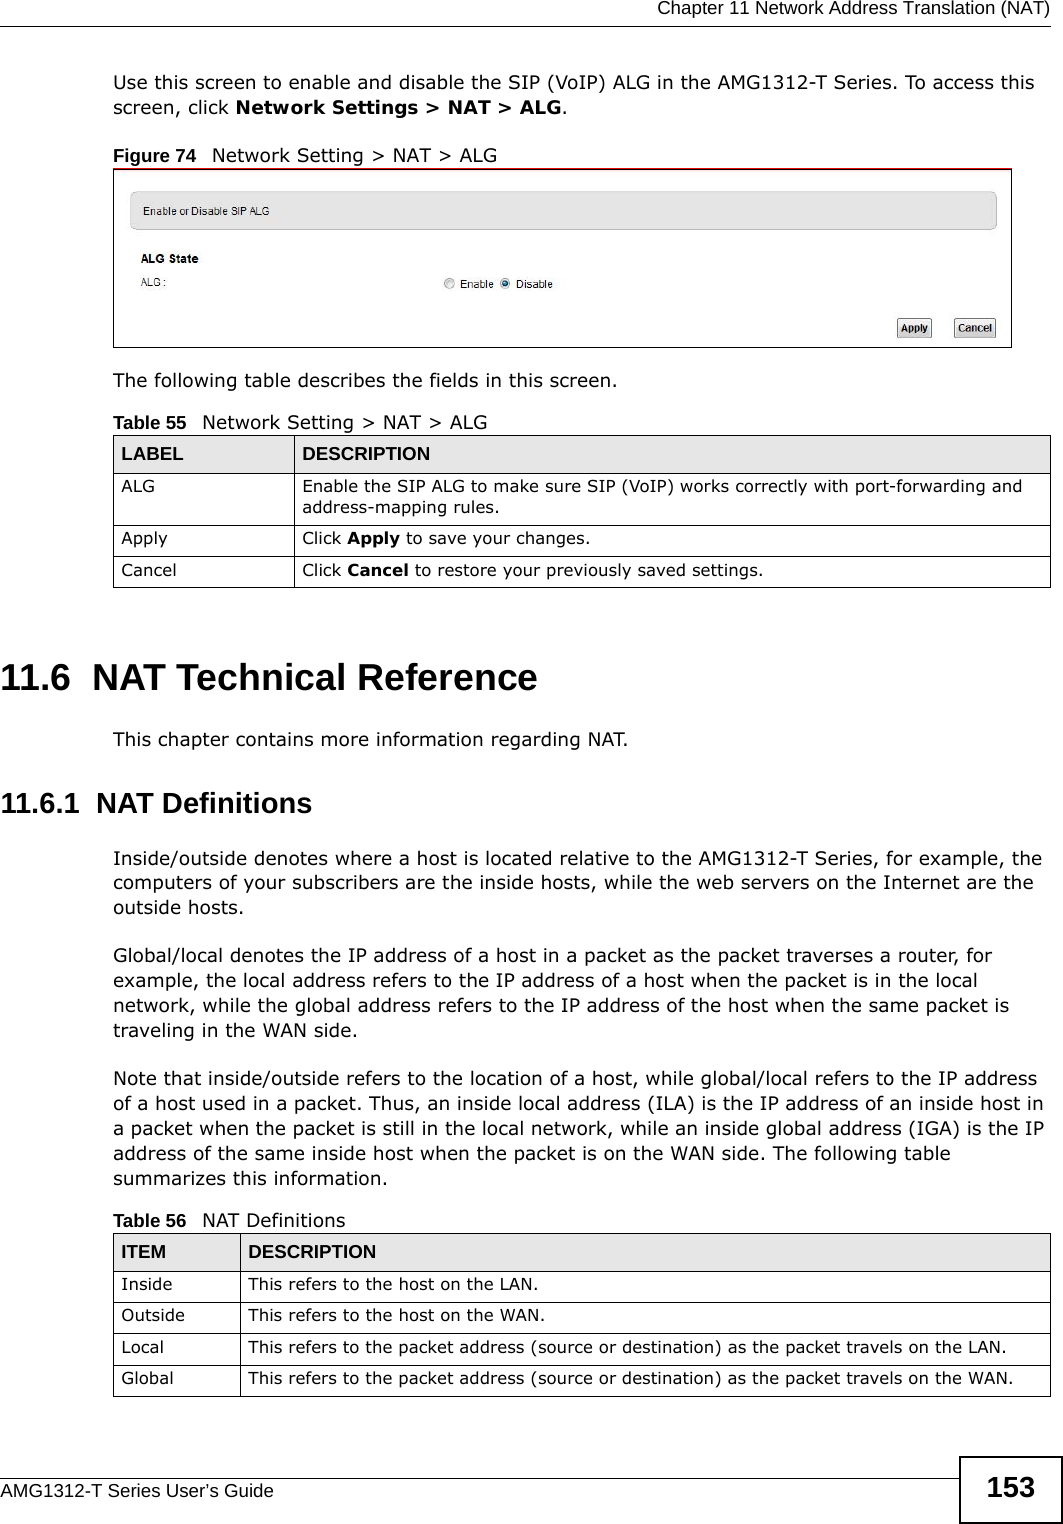  Chapter 11 Network Address Translation (NAT)AMG1312-T Series User’s Guide 153Use this screen to enable and disable the SIP (VoIP) ALG in the AMG1312-T Series. To access this screen, click Network Settings &gt; NAT &gt; ALG.Figure 74   Network Setting &gt; NAT &gt; ALG The following table describes the fields in this screen. 11.6  NAT Technical ReferenceThis chapter contains more information regarding NAT.11.6.1  NAT DefinitionsInside/outside denotes where a host is located relative to the AMG1312-T Series, for example, the computers of your subscribers are the inside hosts, while the web servers on the Internet are the outside hosts. Global/local denotes the IP address of a host in a packet as the packet traverses a router, for example, the local address refers to the IP address of a host when the packet is in the local network, while the global address refers to the IP address of the host when the same packet is traveling in the WAN side. Note that inside/outside refers to the location of a host, while global/local refers to the IP address of a host used in a packet. Thus, an inside local address (ILA) is the IP address of an inside host in a packet when the packet is still in the local network, while an inside global address (IGA) is the IP address of the same inside host when the packet is on the WAN side. The following table summarizes this information.Table 55   Network Setting &gt; NAT &gt; ALGLABEL DESCRIPTIONALG Enable the SIP ALG to make sure SIP (VoIP) works correctly with port-forwarding and address-mapping rules.Apply Click Apply to save your changes.Cancel Click Cancel to restore your previously saved settings.Table 56   NAT DefinitionsITEM DESCRIPTIONInside This refers to the host on the LAN.Outside This refers to the host on the WAN.Local This refers to the packet address (source or destination) as the packet travels on the LAN.Global This refers to the packet address (source or destination) as the packet travels on the WAN.